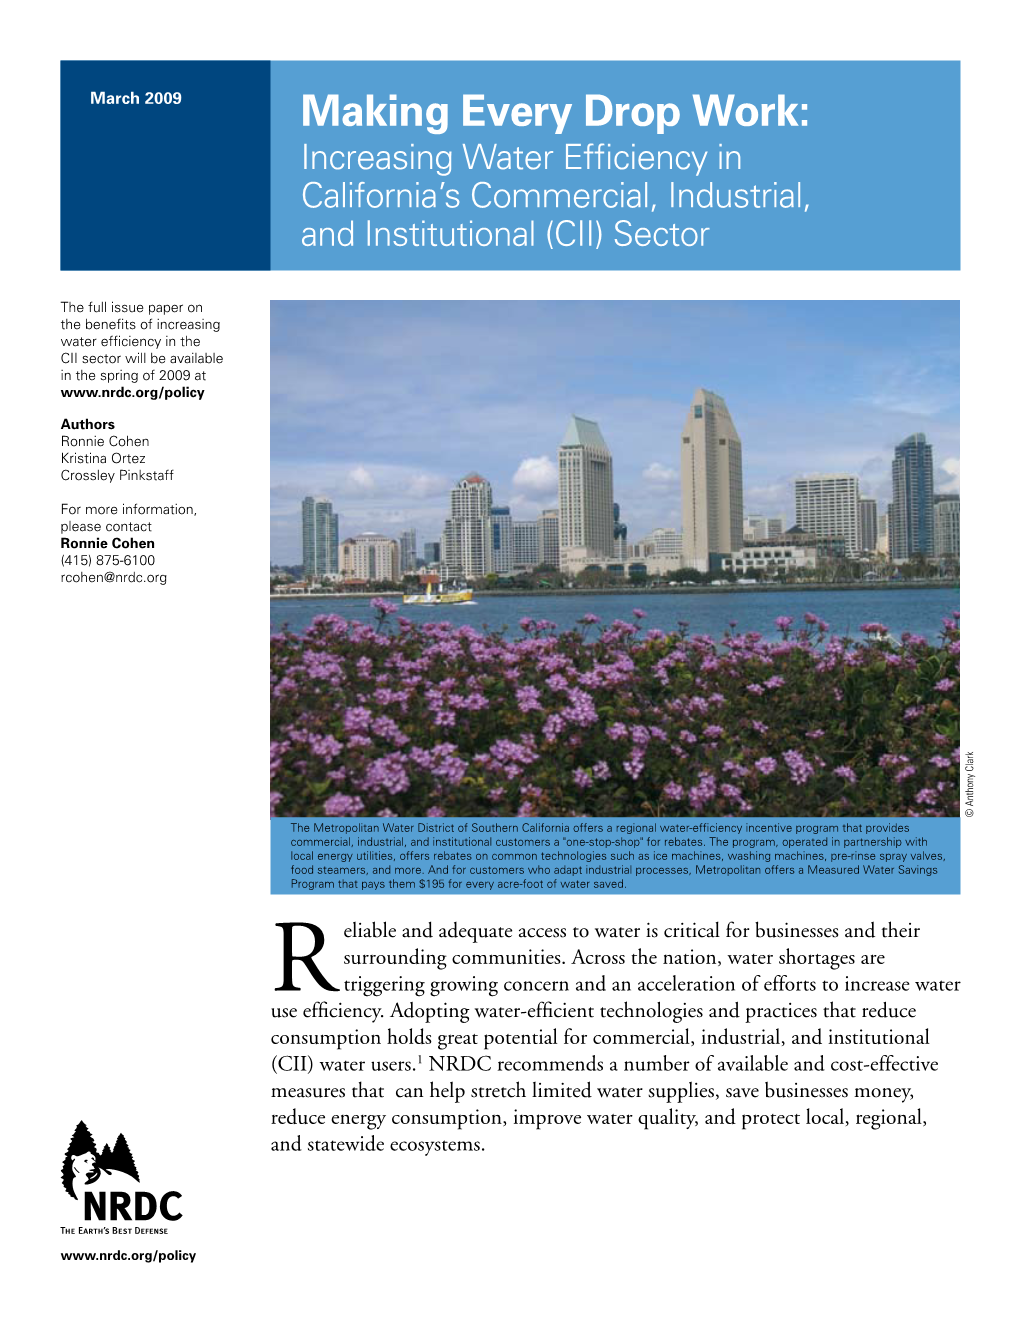 Making Every Drop Work: Increasing Water Efficiency in California’S Commercial, Industrial, and Institutional (CII) Sector